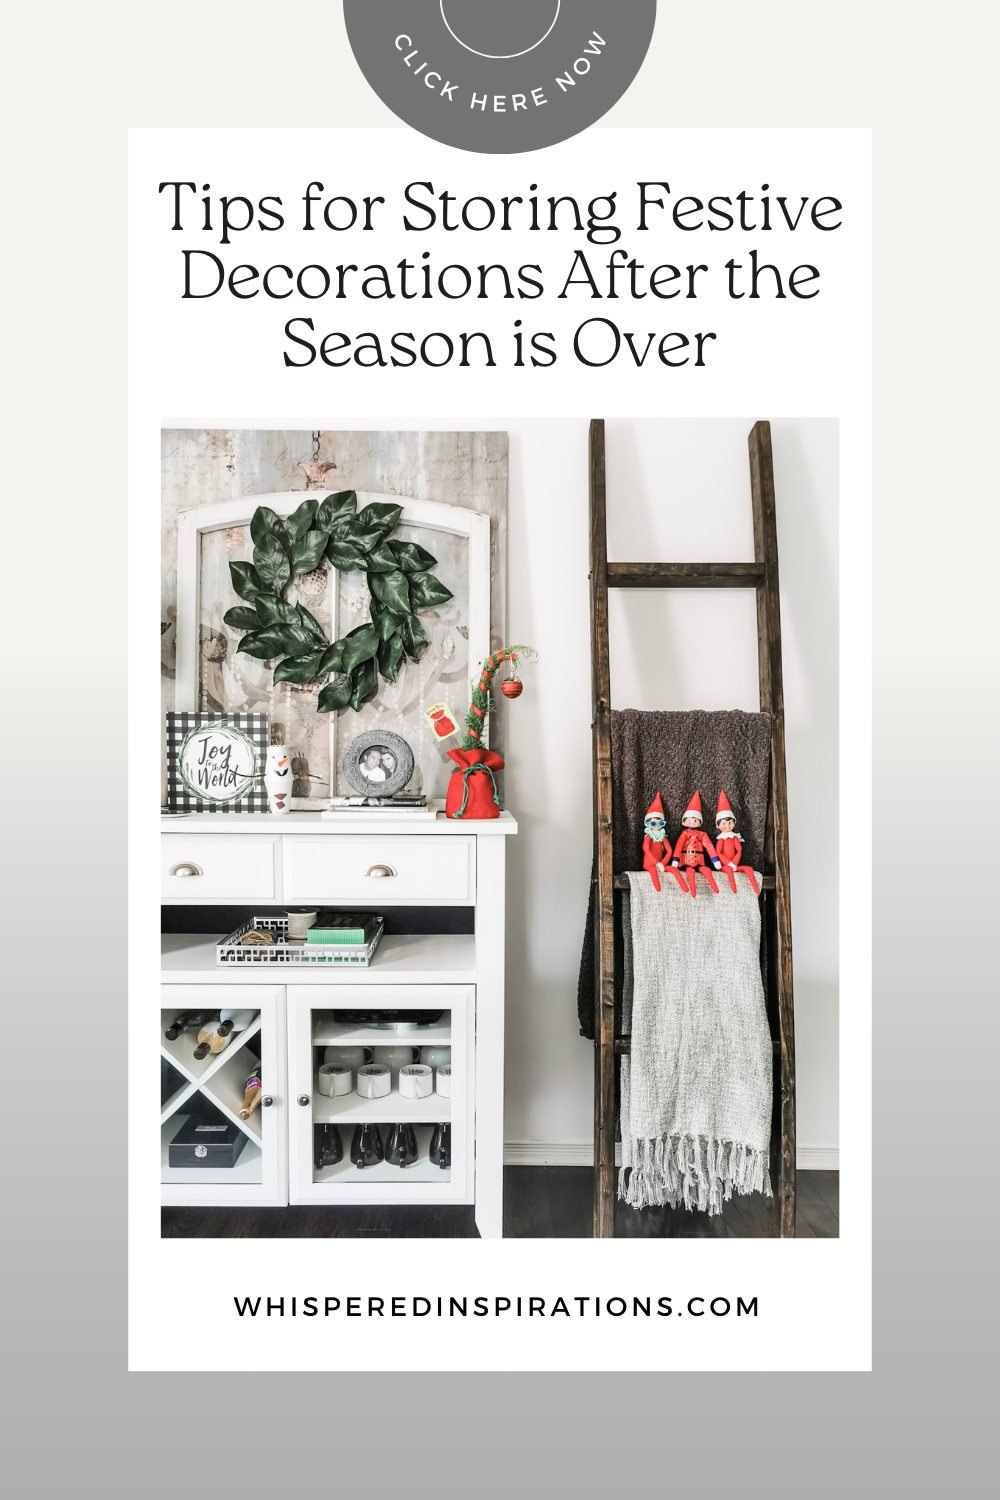 A living room with holiday decor. This article covers tips for storing festive decorations after the season is over.